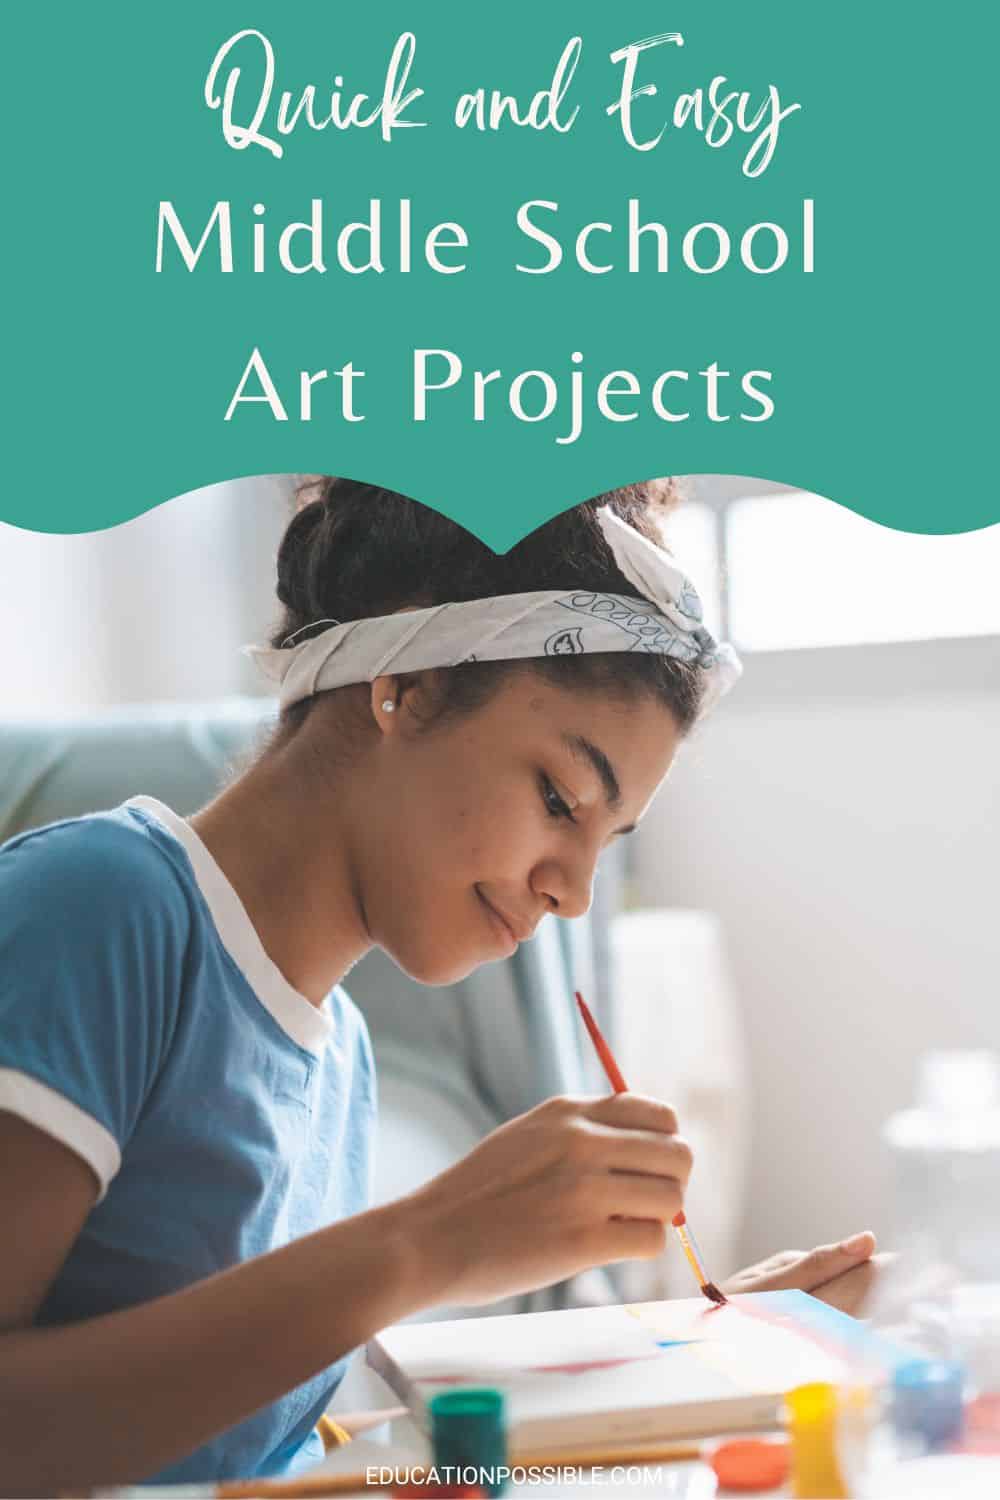 10 Quick Middle School Art Projects When You’re Pressed for Time